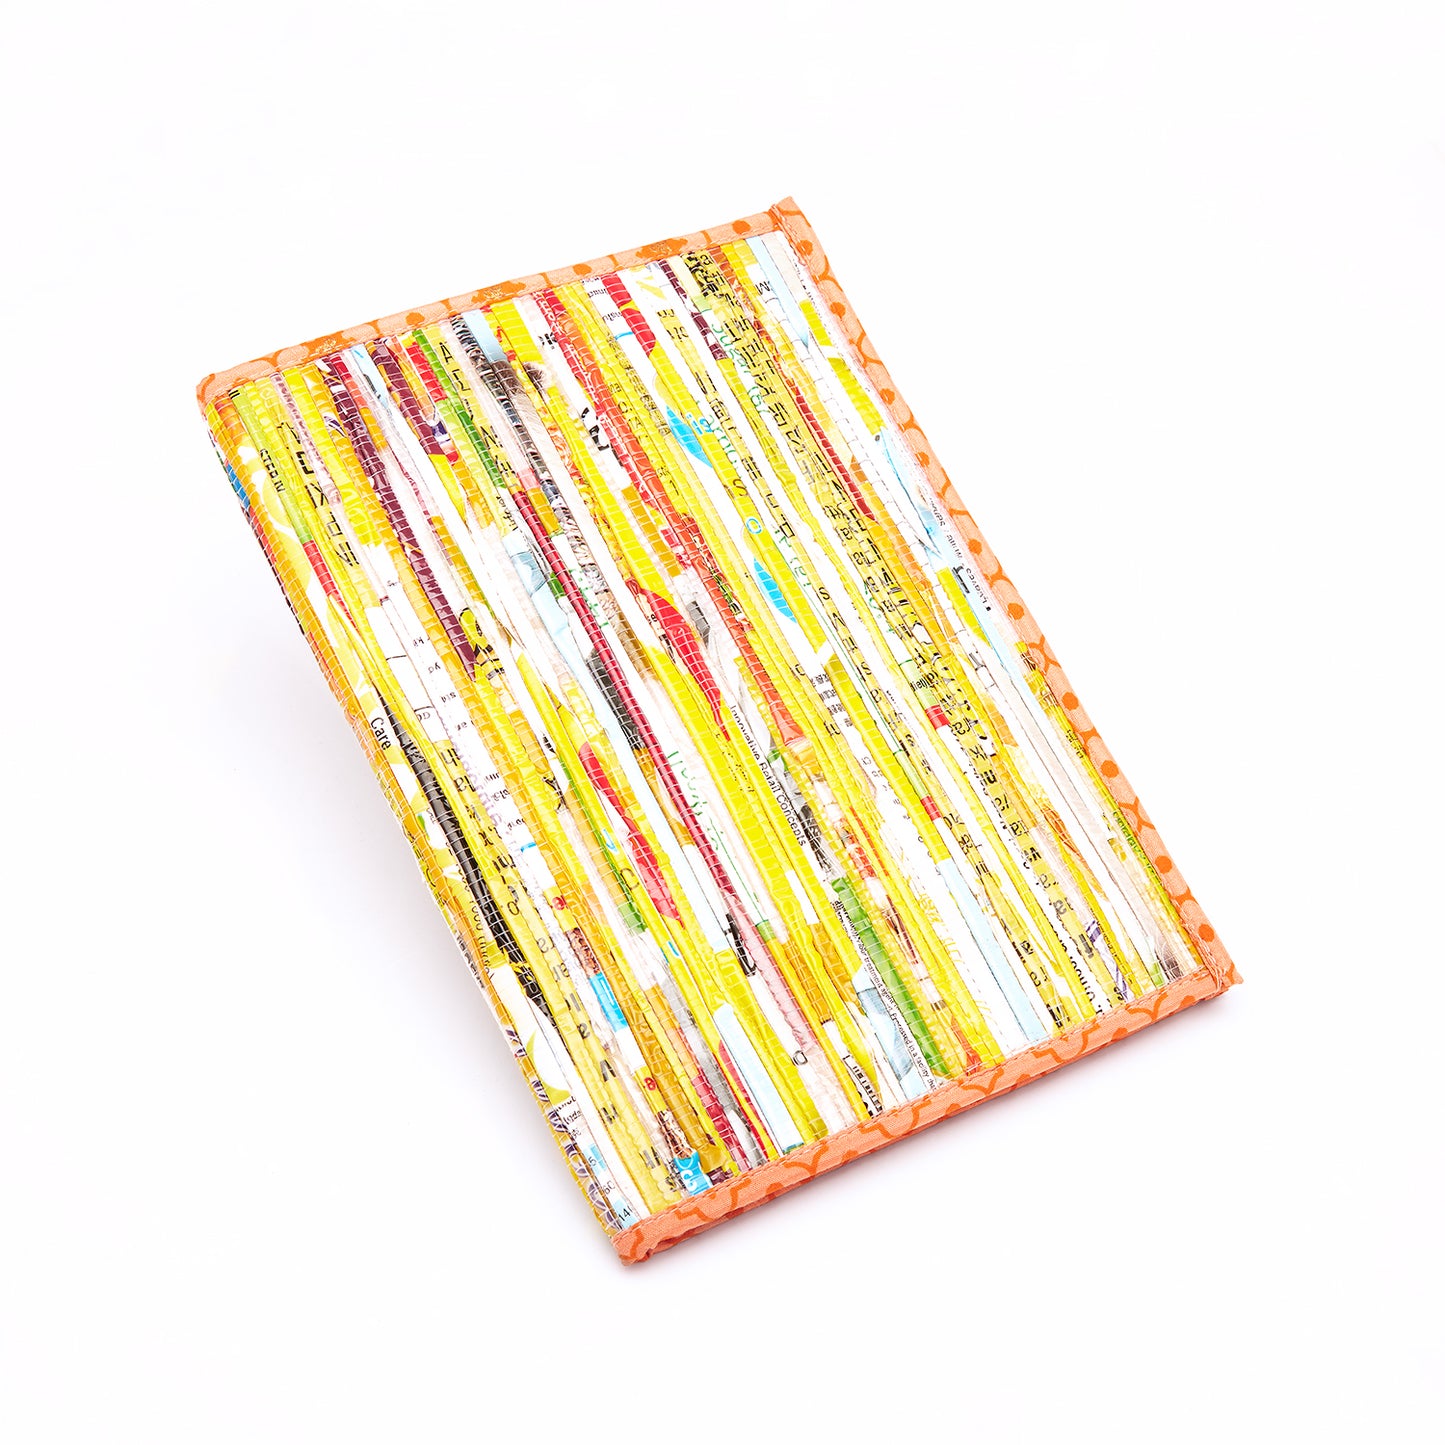 Vibrant mix of Yellow, Recycled Plastics (MLP) Diary Cover